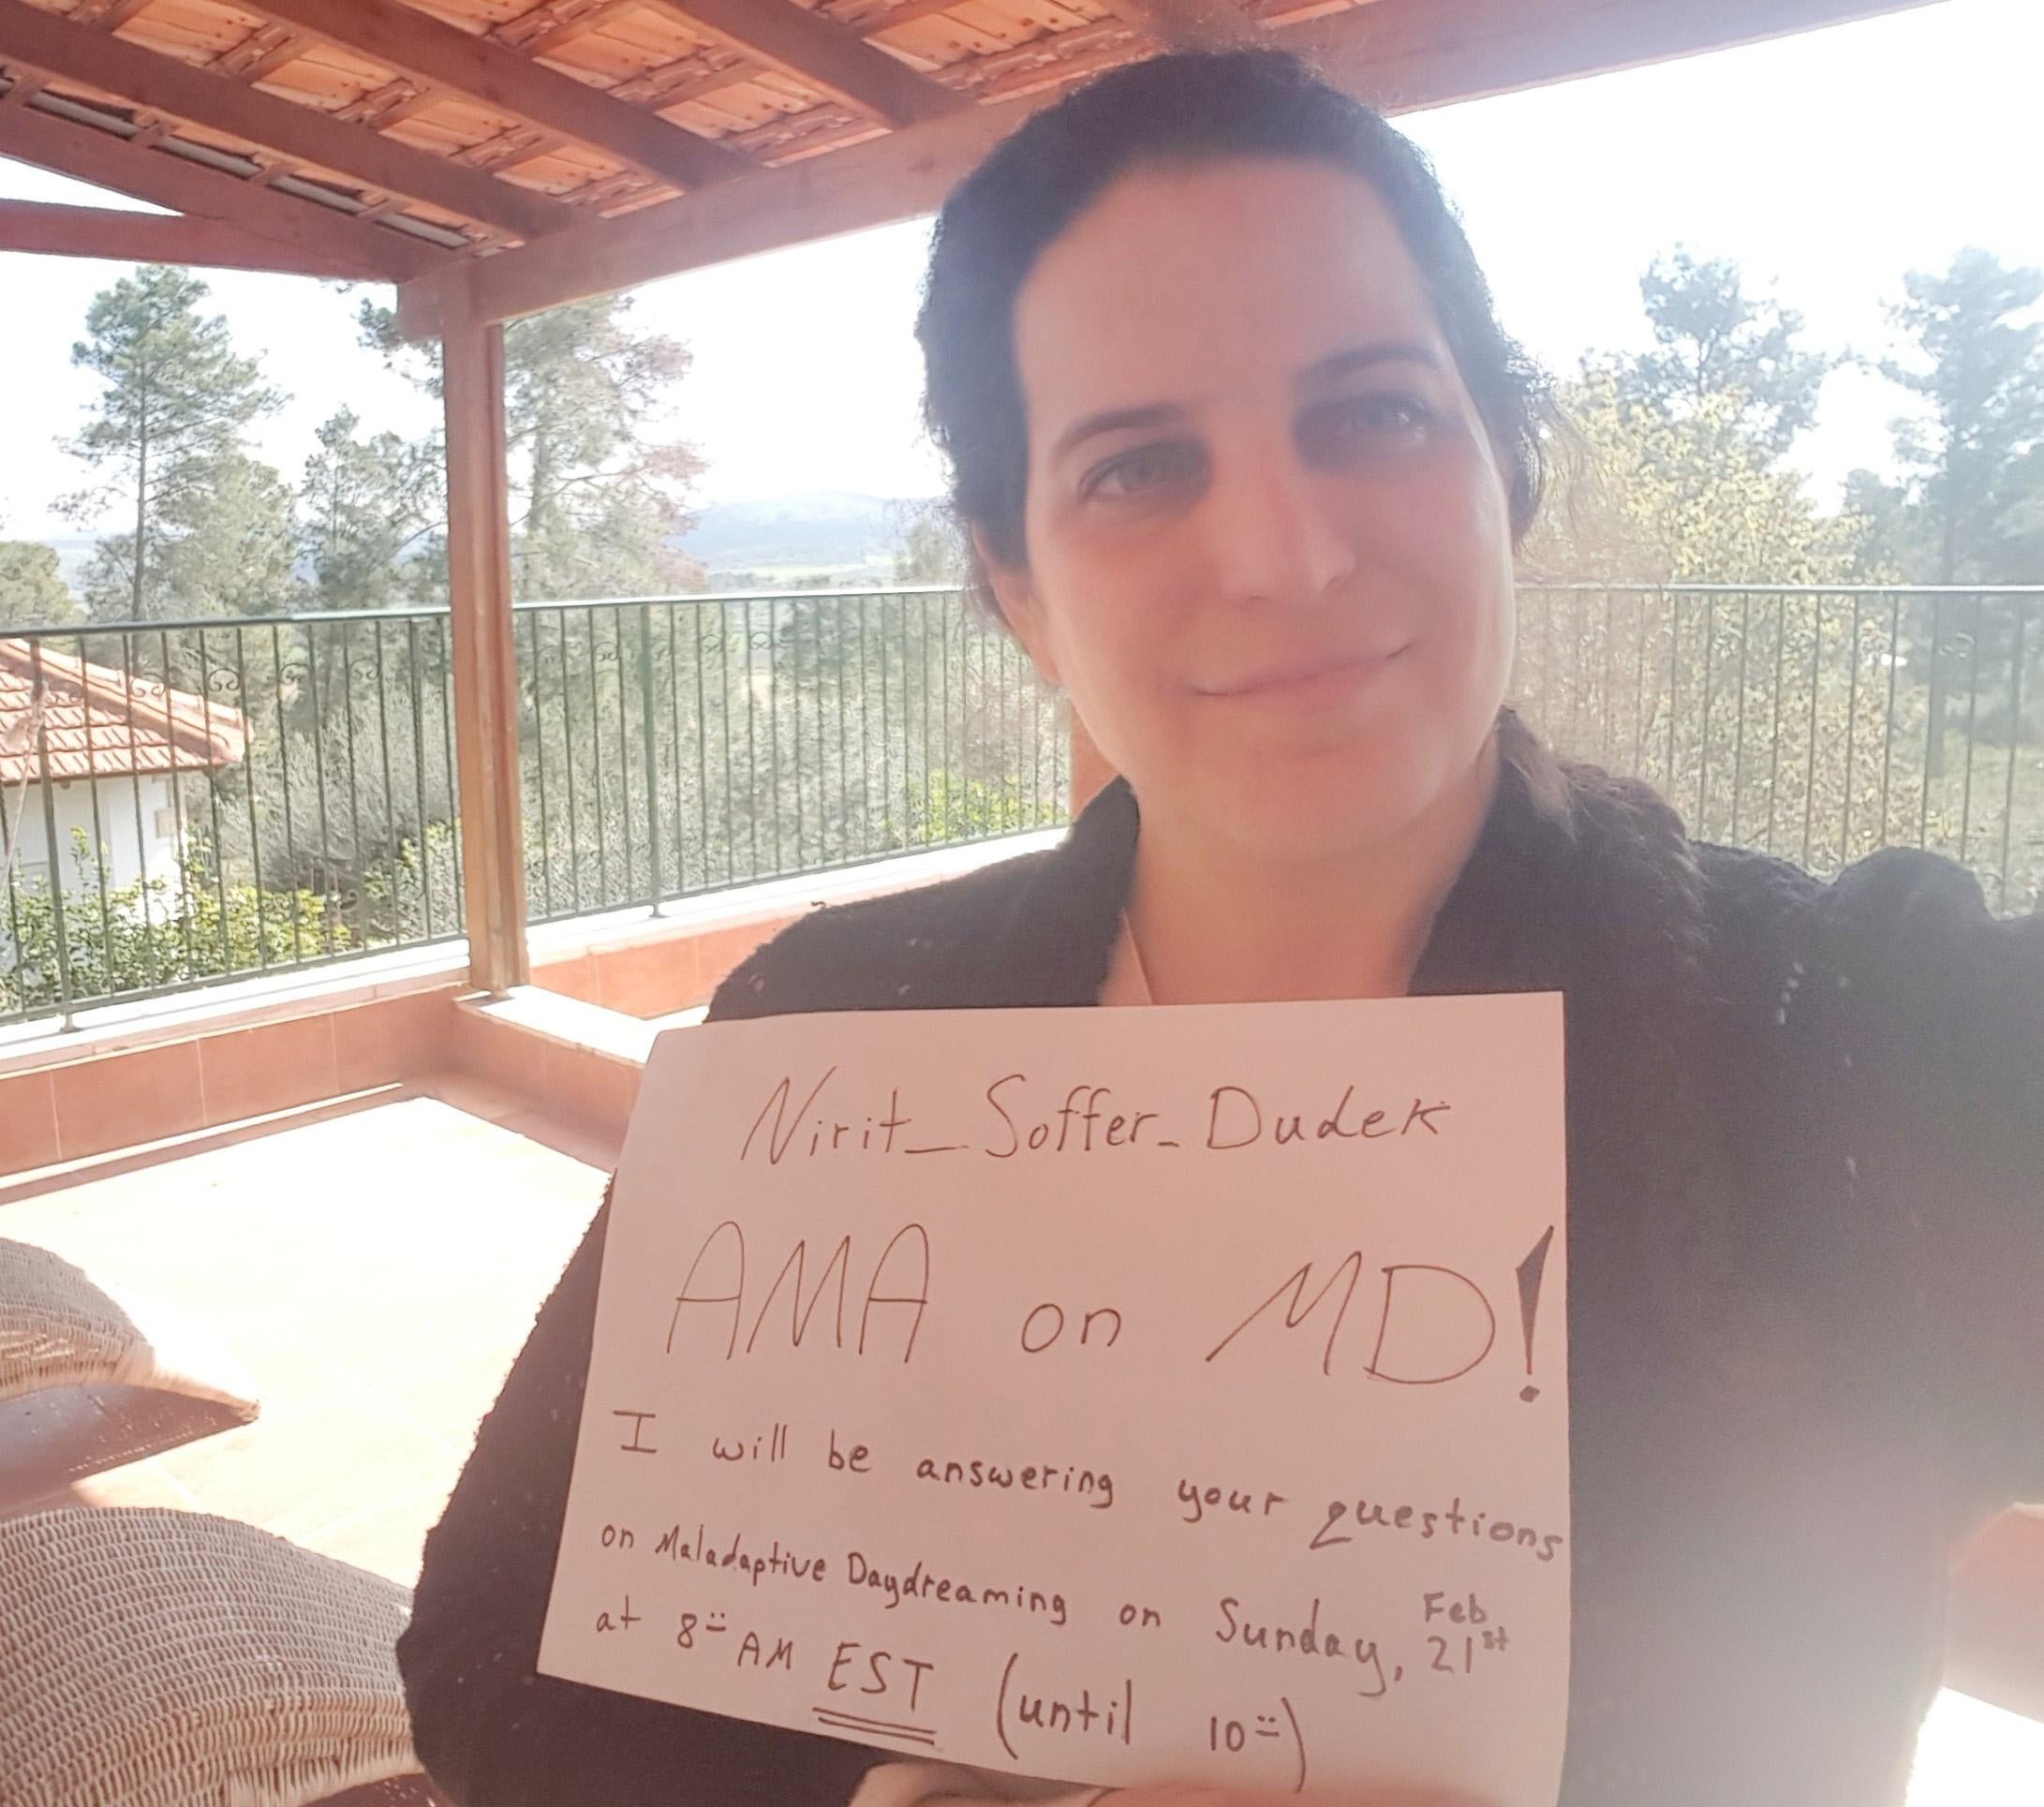 5 Most Upvoted Questions from Dr. Soffer-Dudek’s AMA